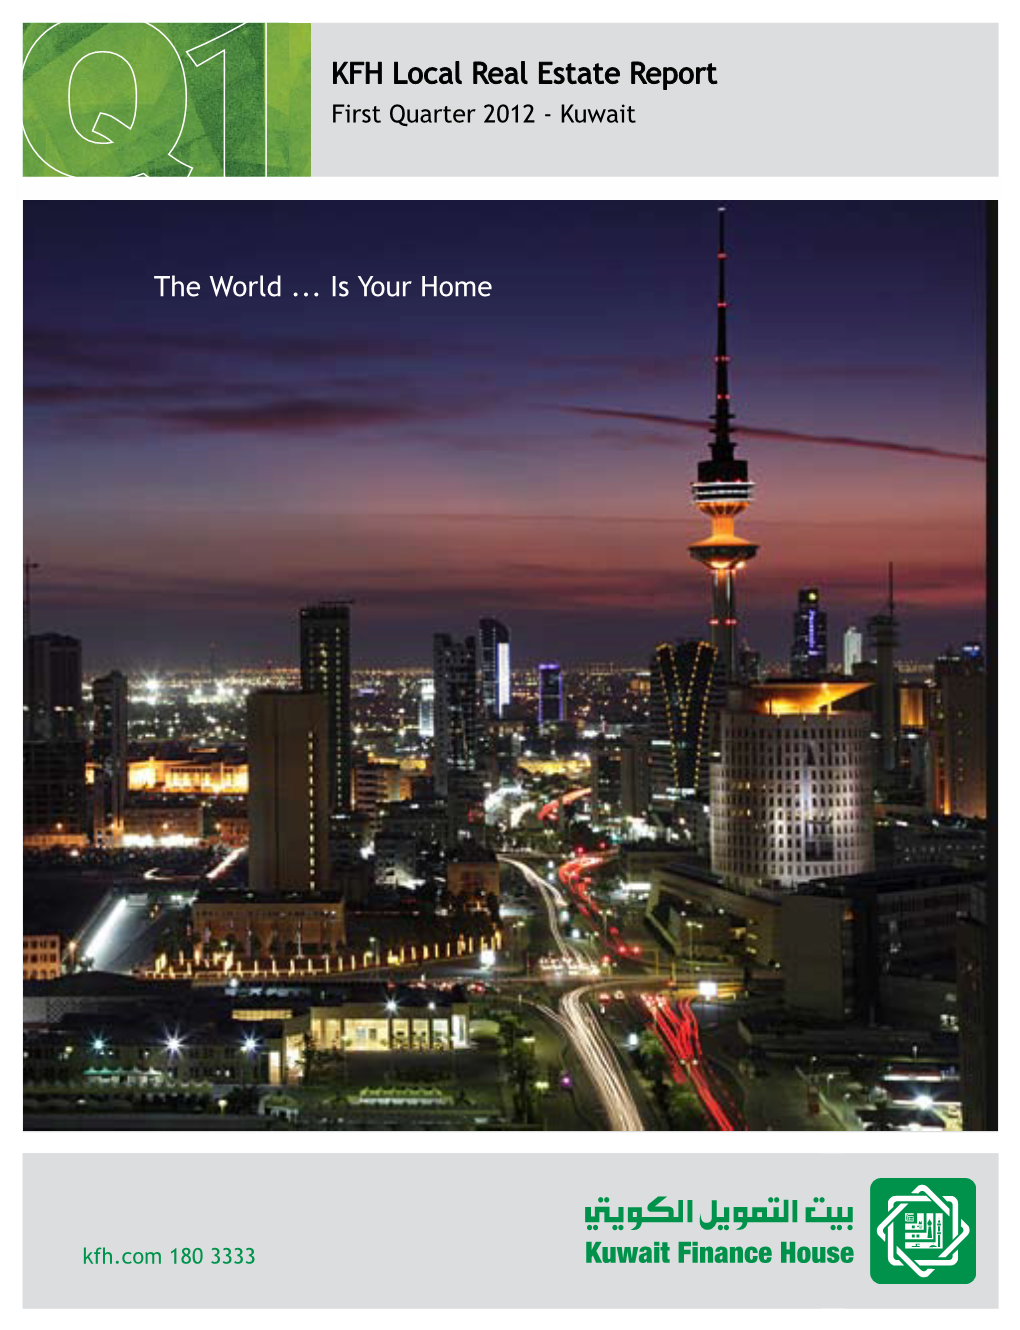 KFH Local Real Estate Report First Quarter 2012 - Kuwait First Quarter 2012 - Kuwait